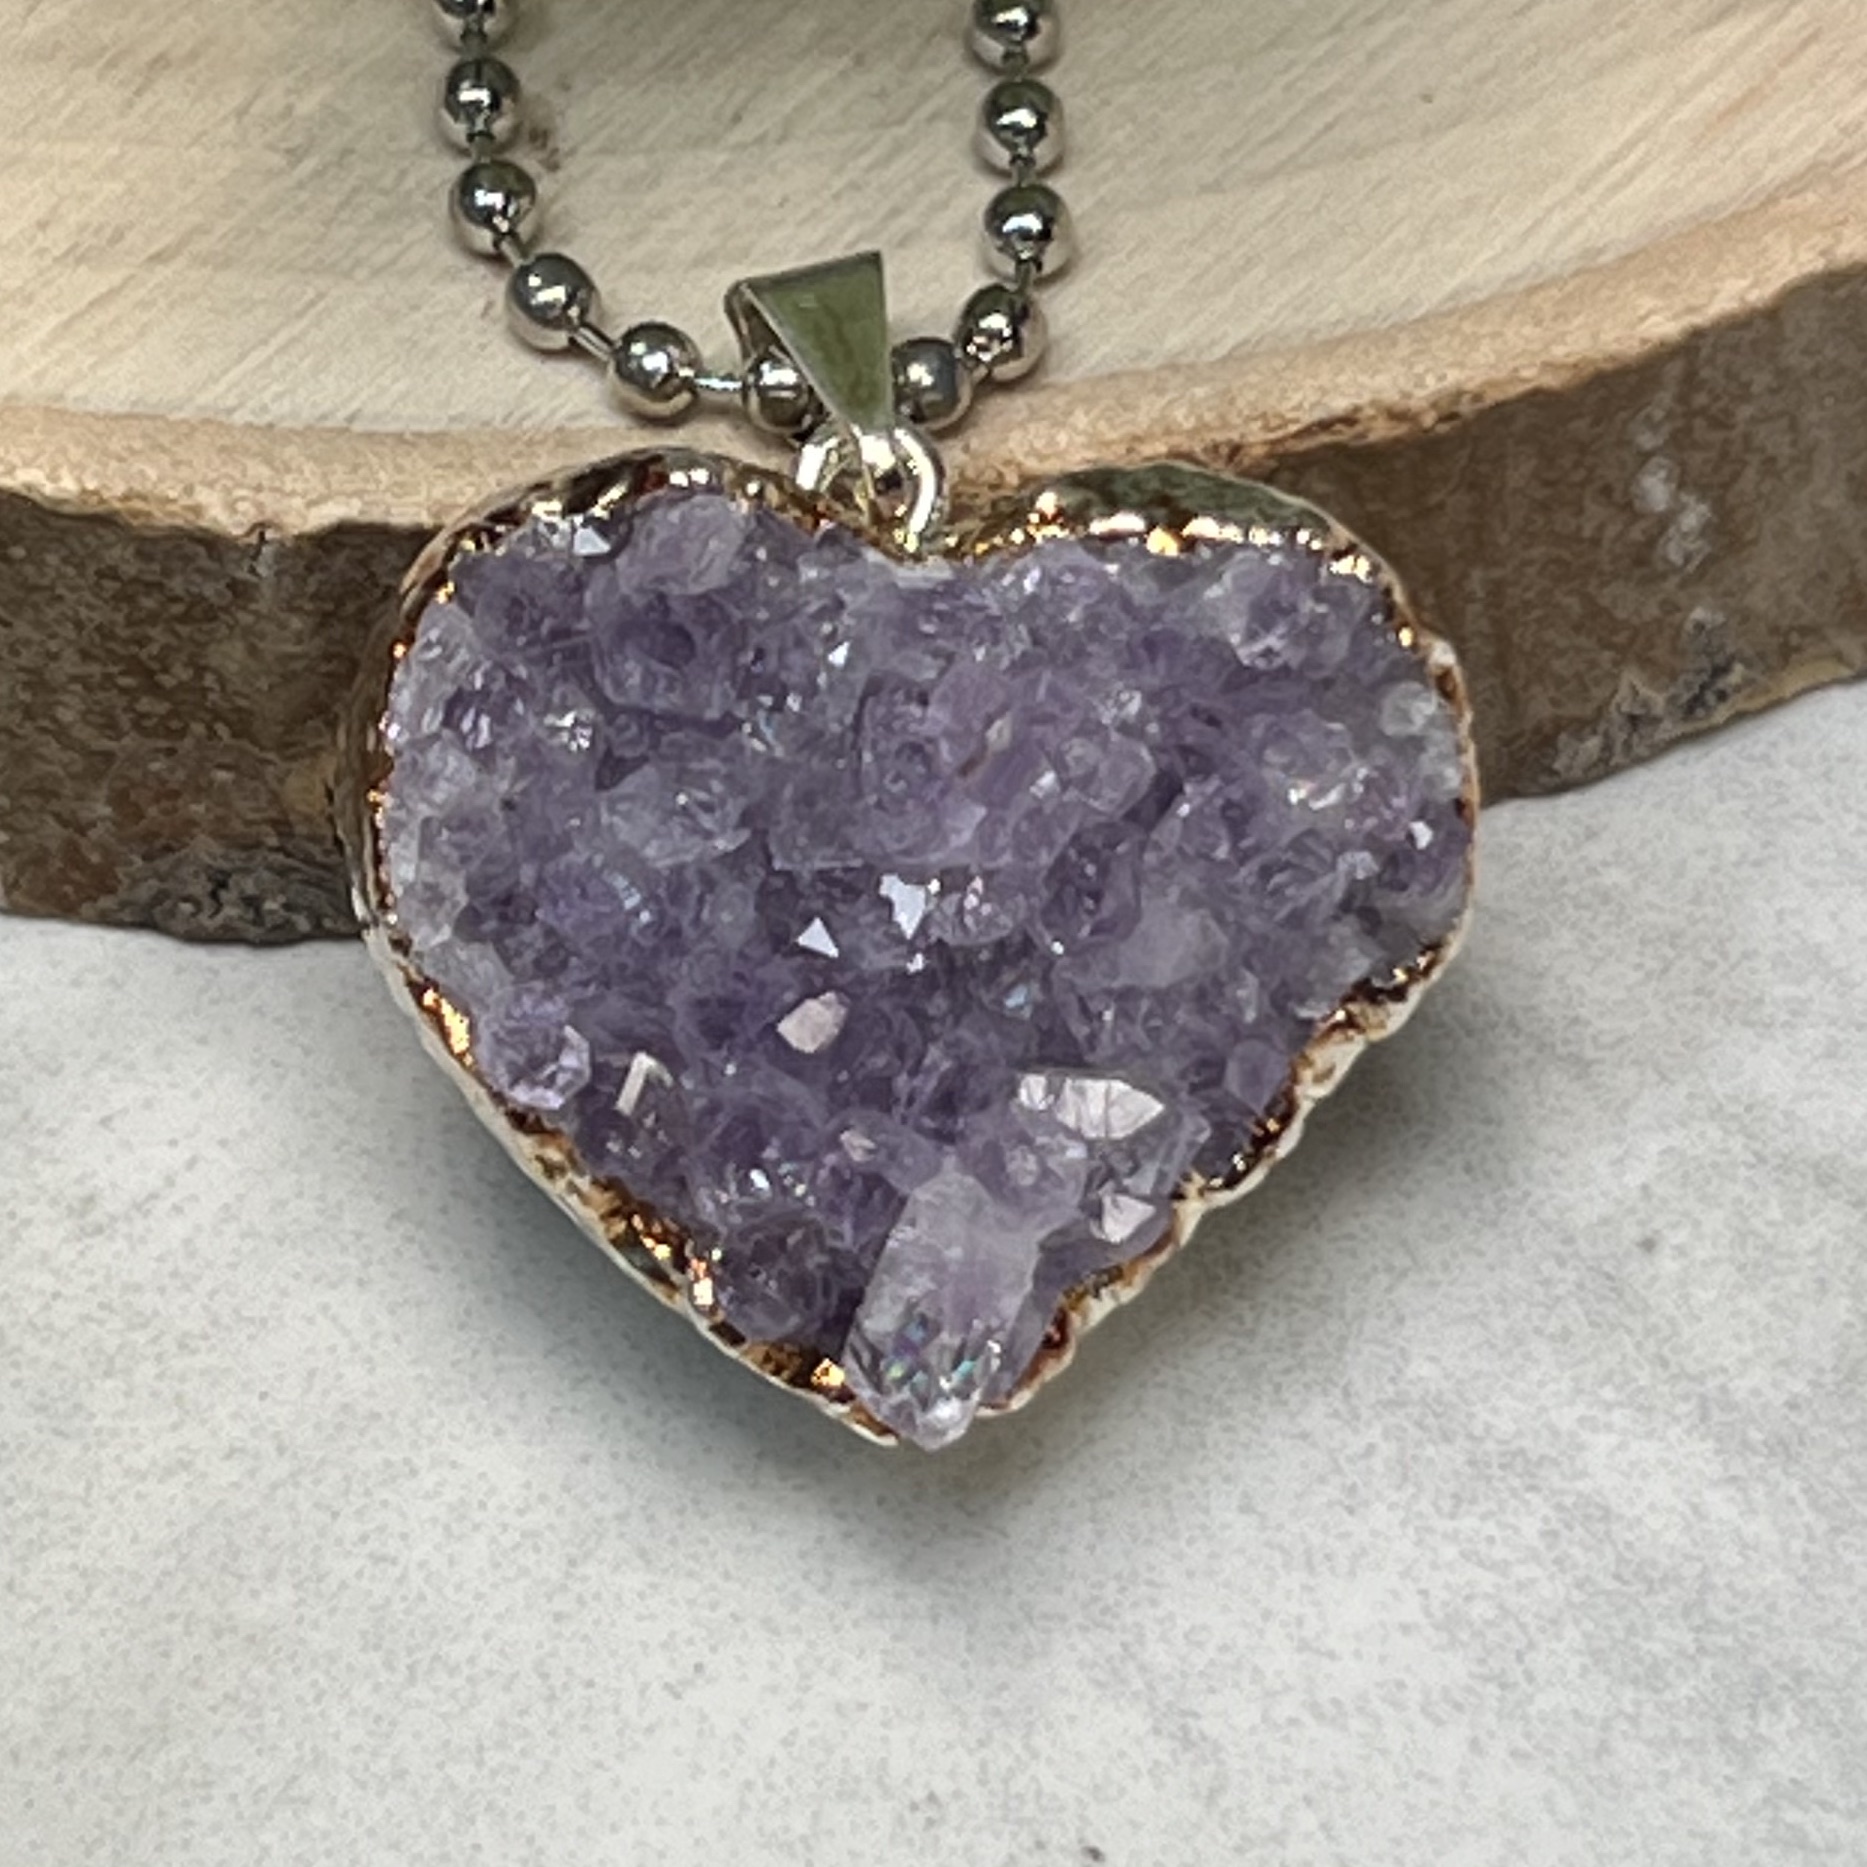 Amethyst Heart Necklace - The Crystal Council